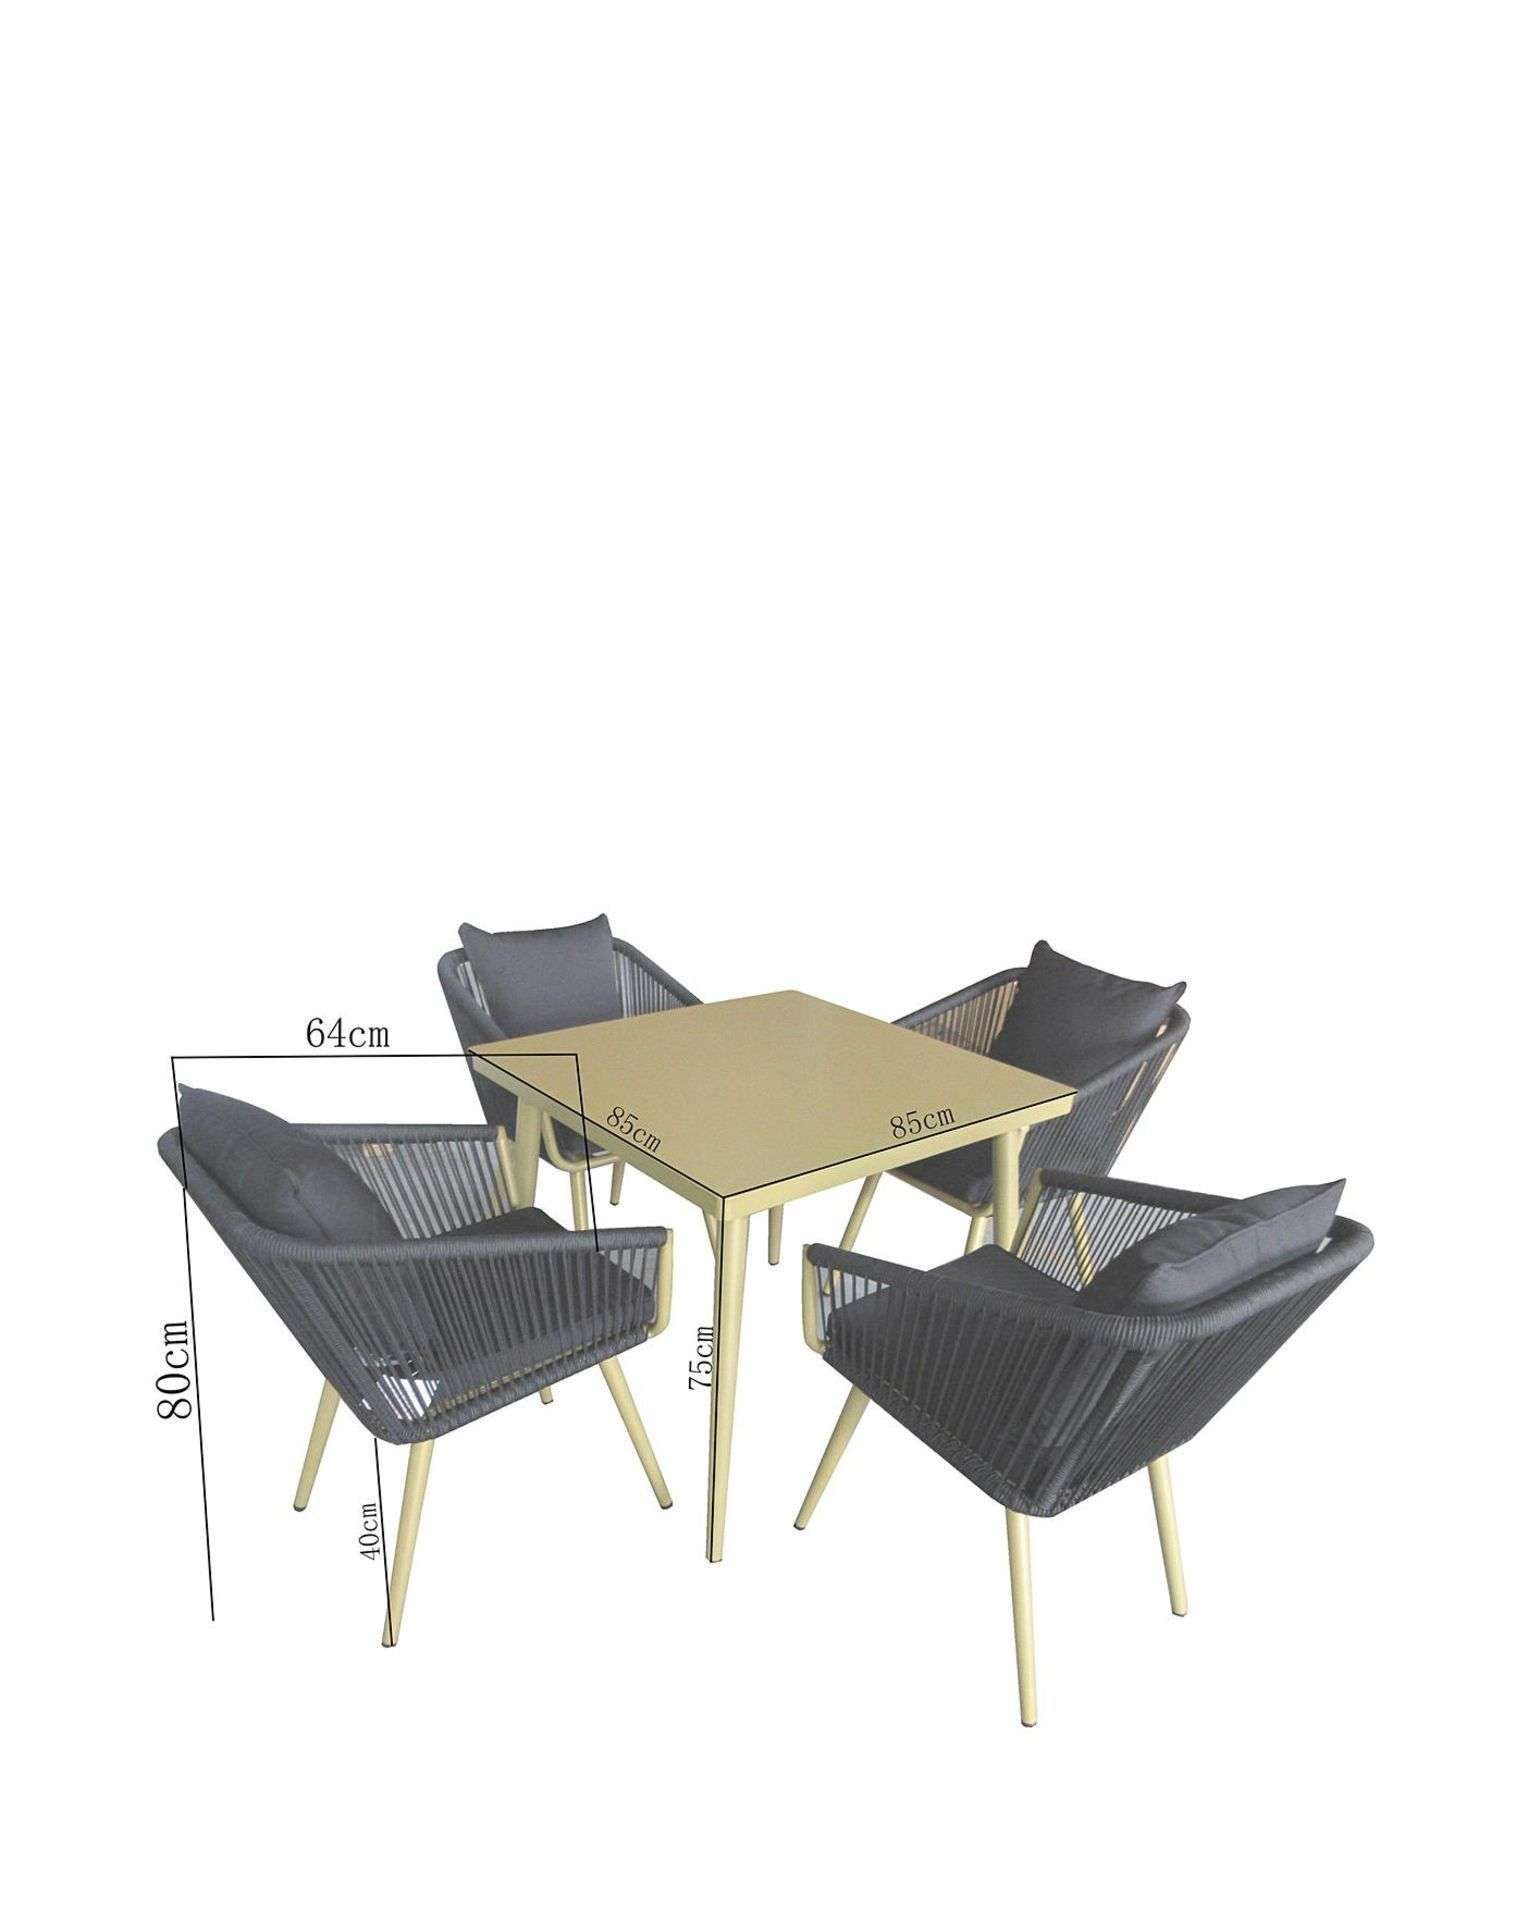 Trade Lot 4 x New & Packaged Joanna Hope Naya 4 Seater Dining Sets. RRP £719 each. This Exclusive - Bild 5 aus 5